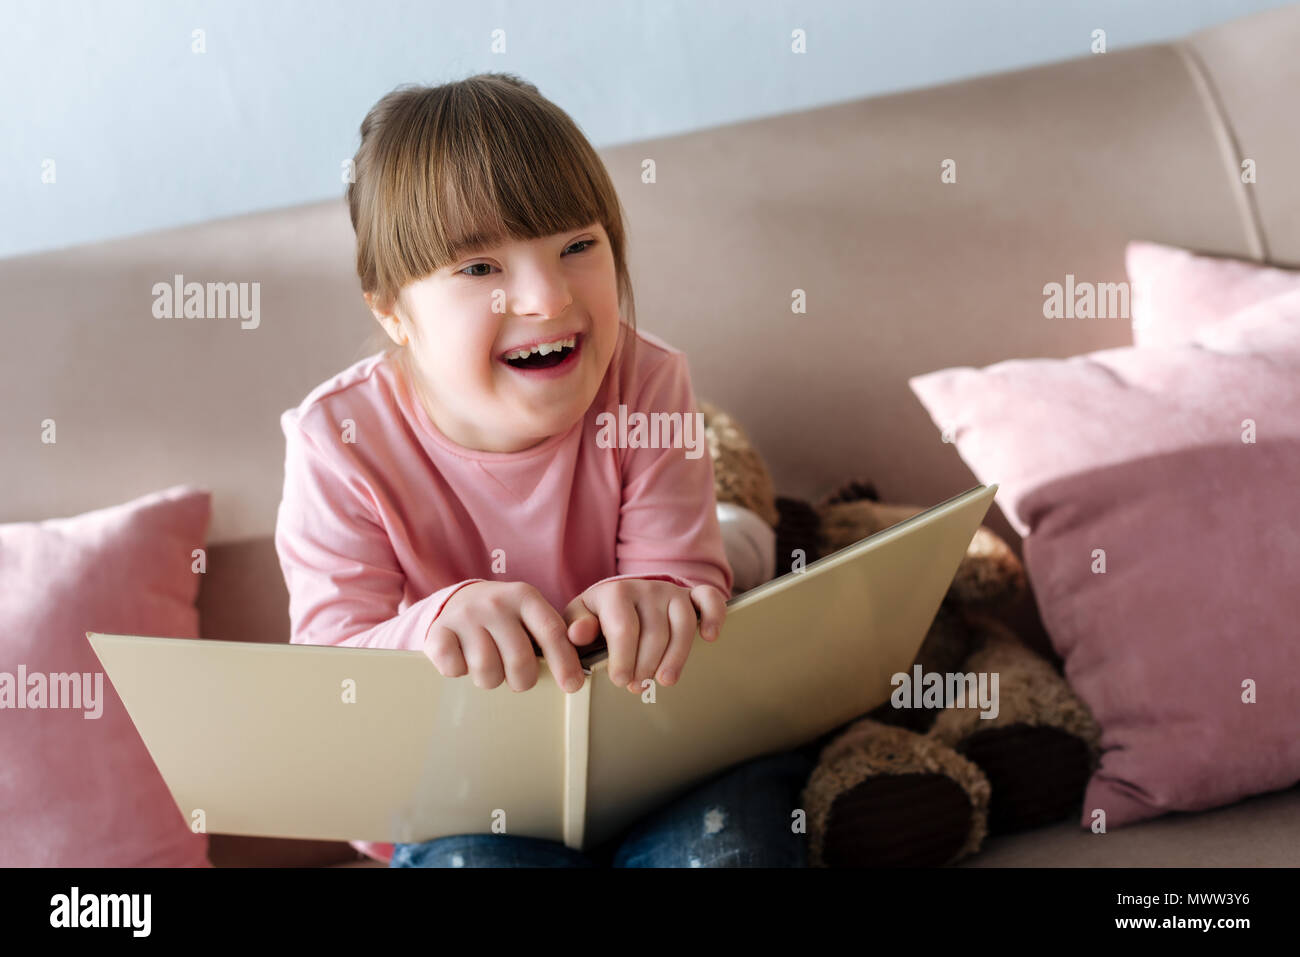 Kid with down syndrome holding book and laughing Stock Photo